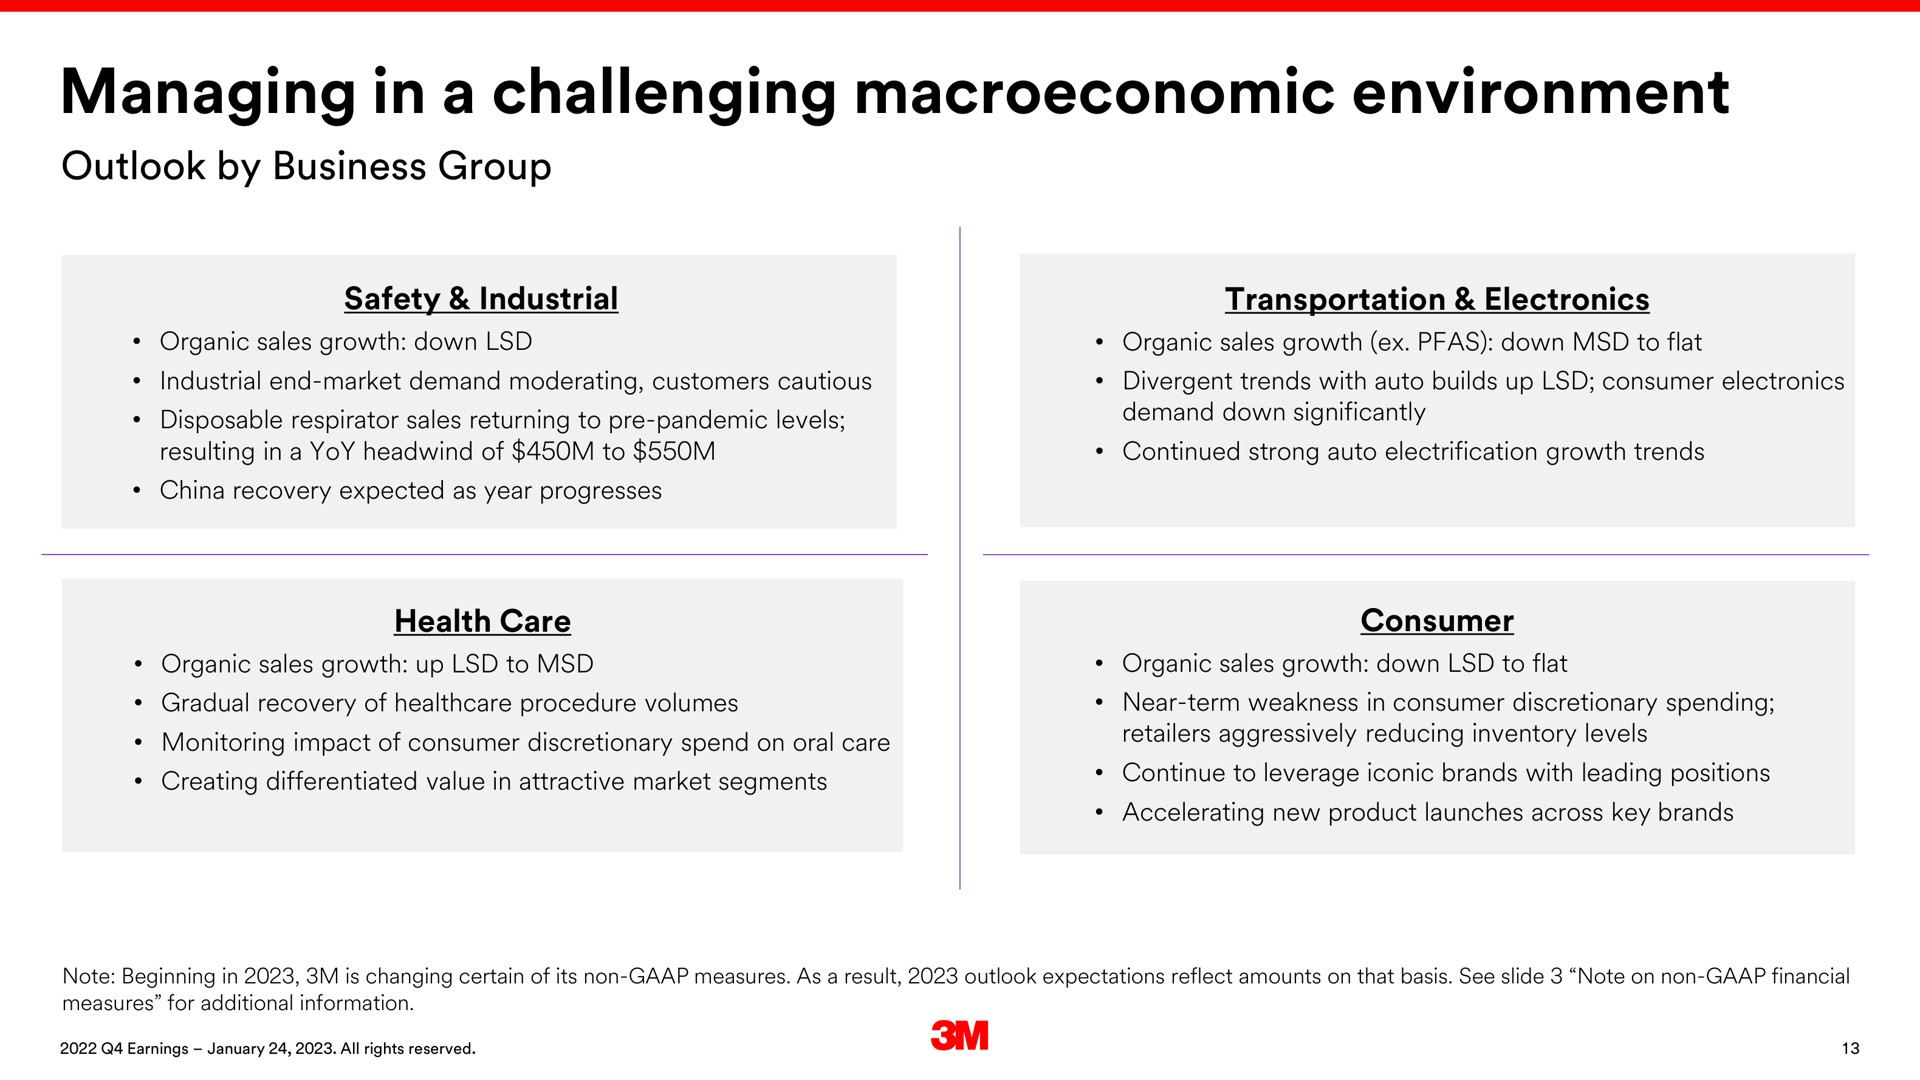 managing in a challenging environment outlook by business group | 3M